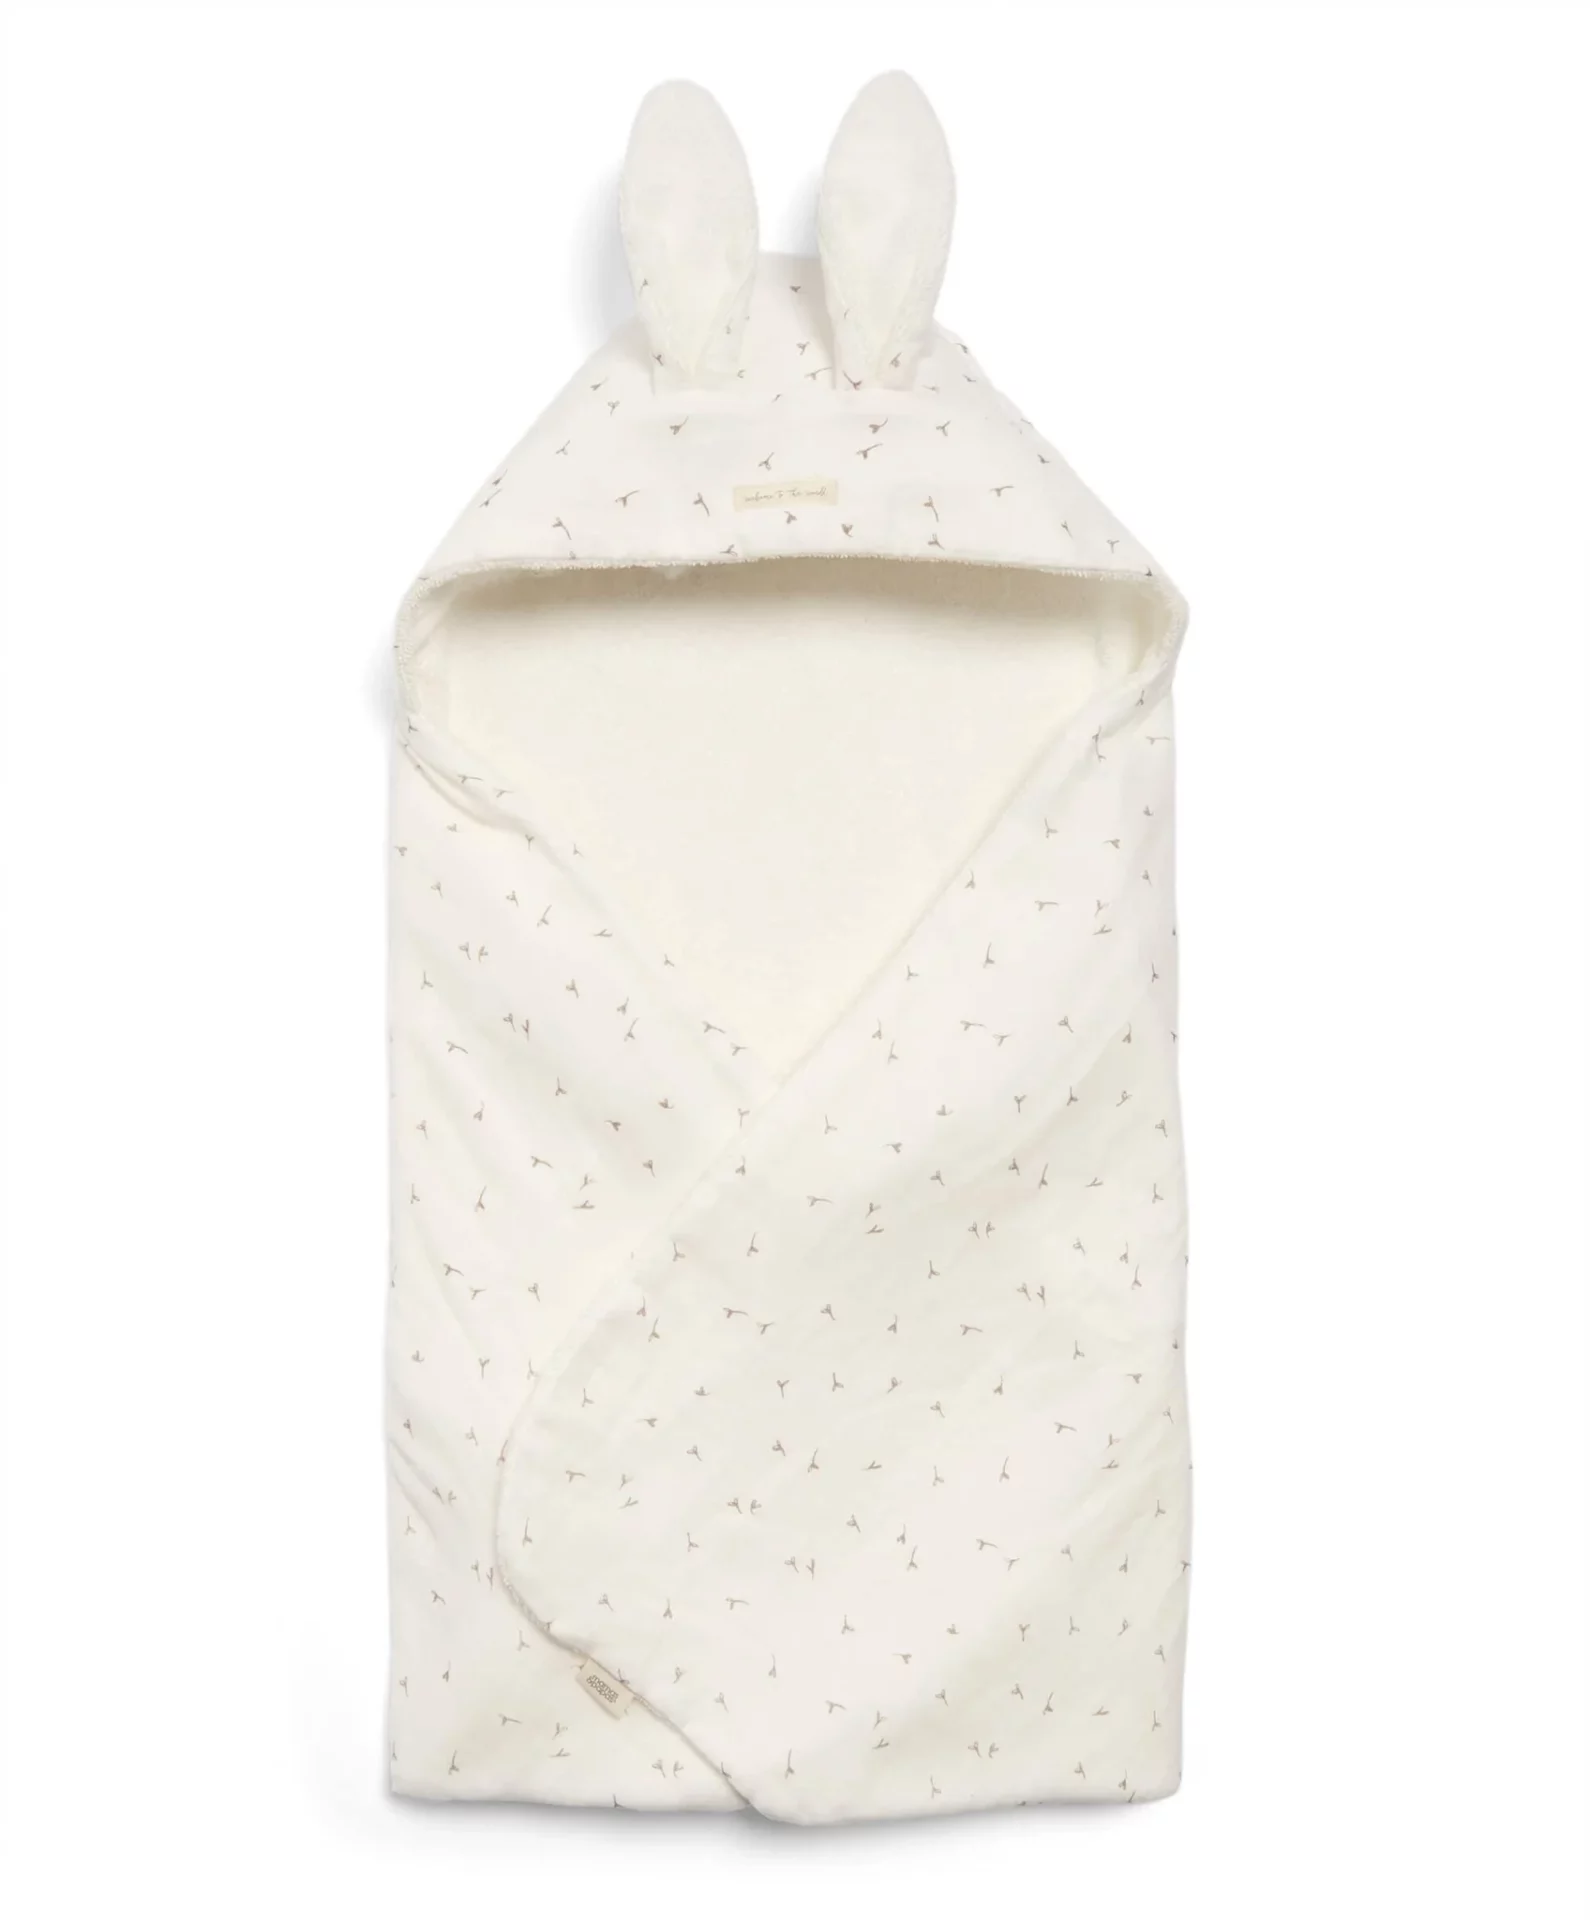 Mamas Papas Welcome To The World Seedling Seed Hooded Towel White 34479708471461 1024x1024@2x